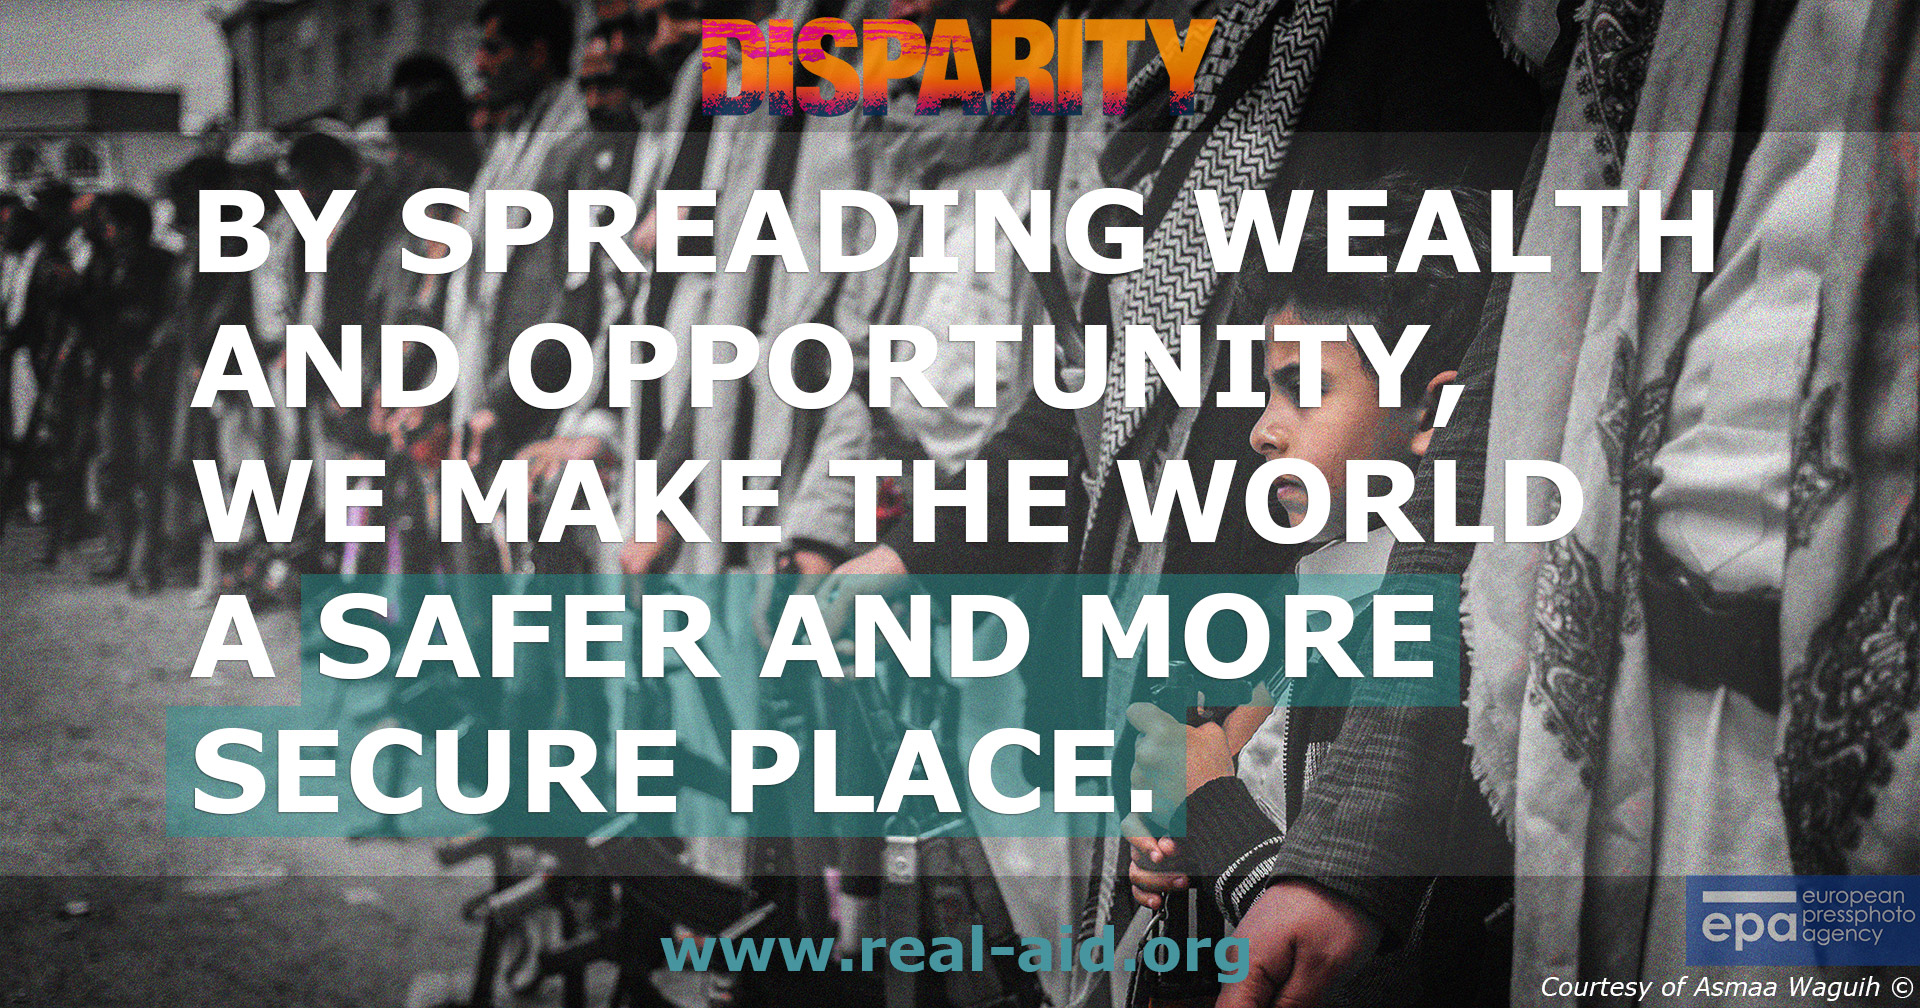 Disparity Film Poster, by spreading wealth and opportunity, we make the world a safer place text, child with gun image